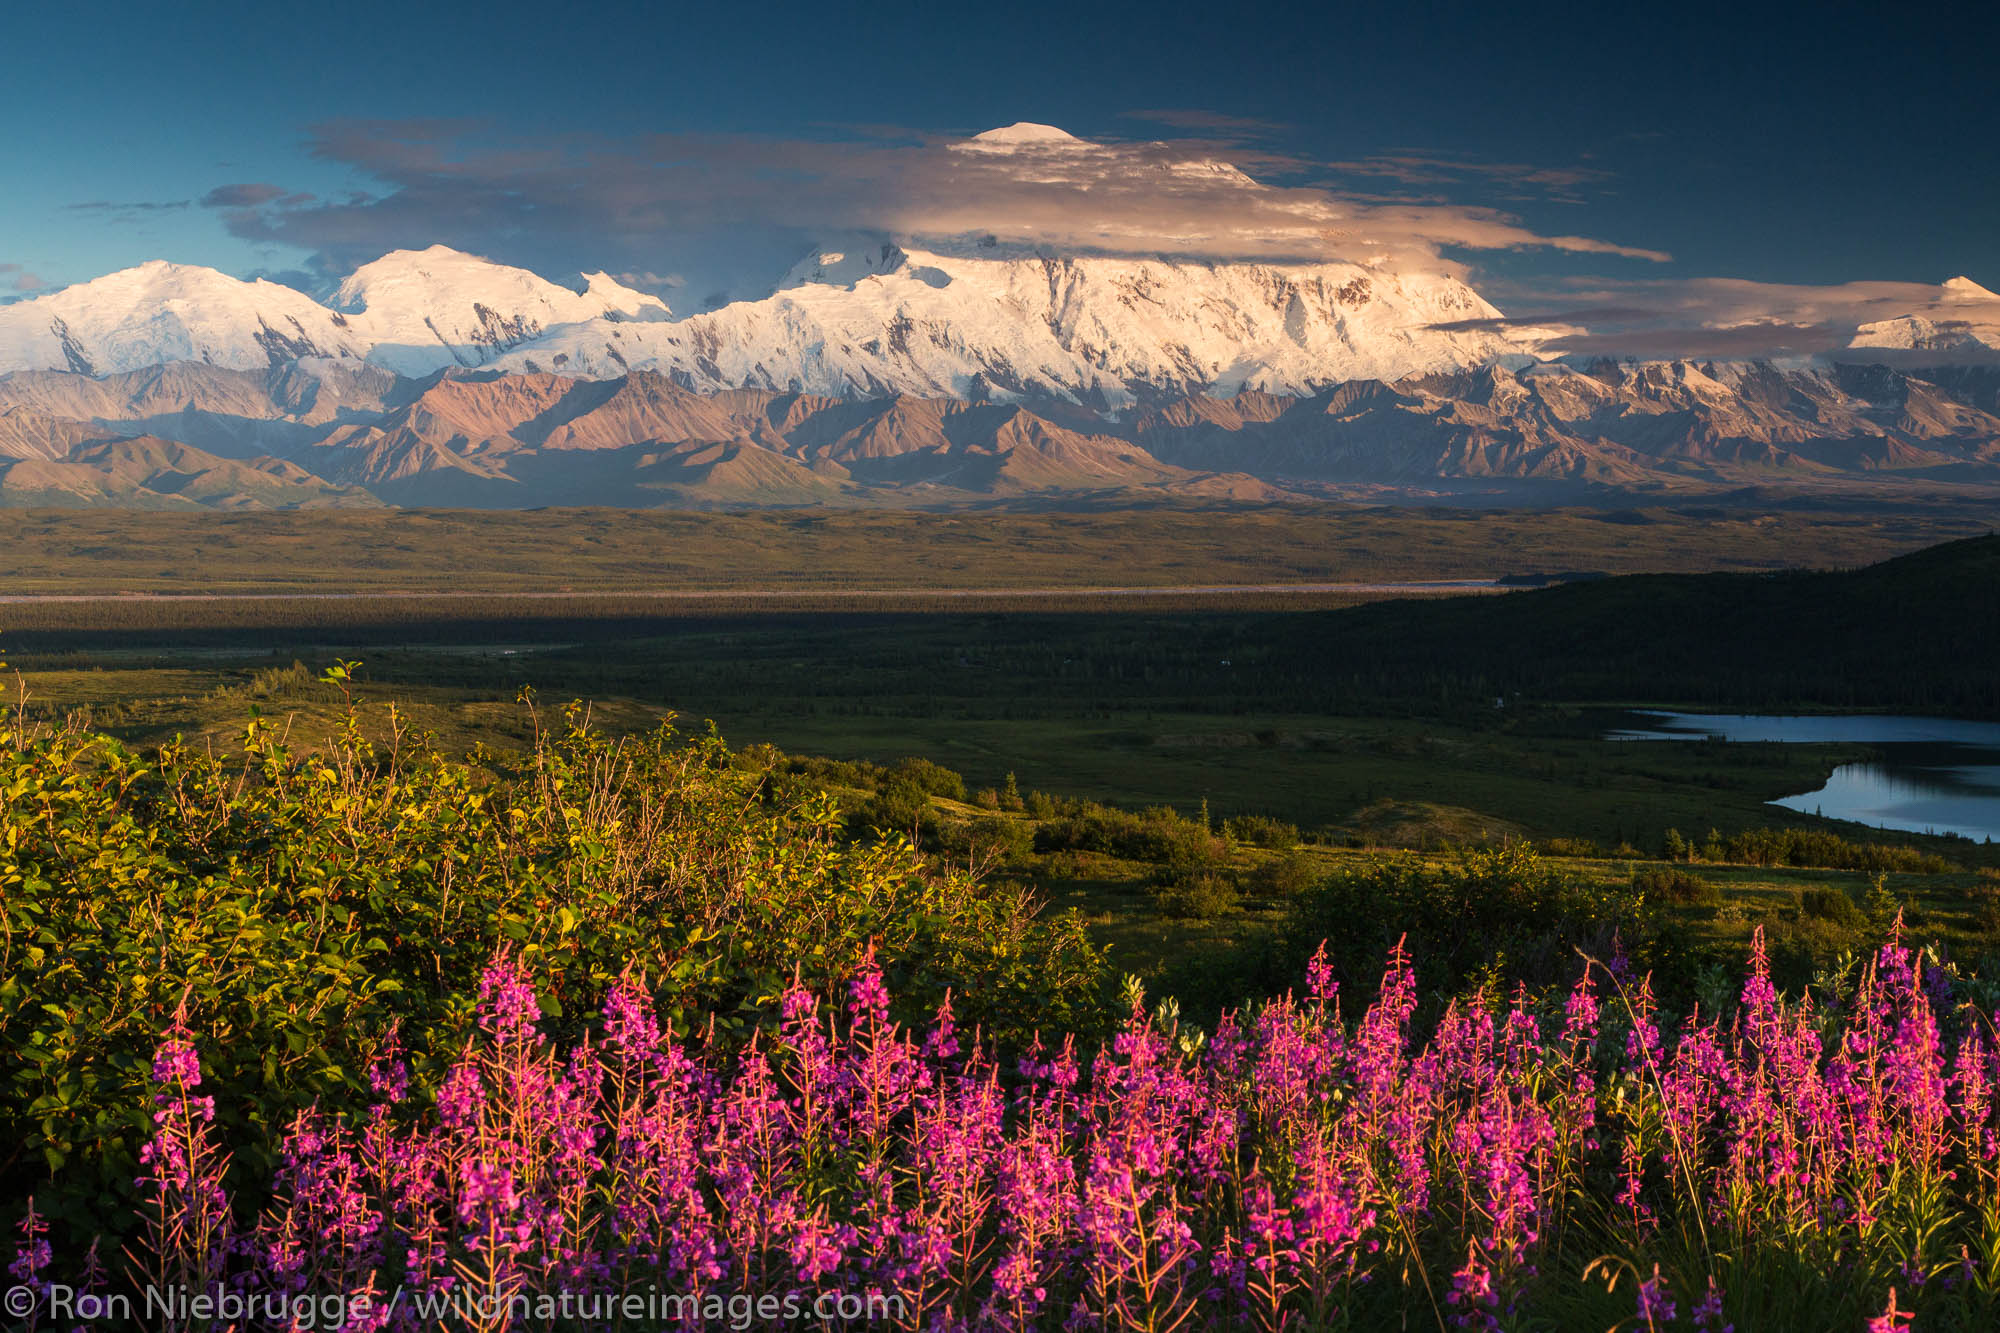 Fireweed and Mt. McKinley, locally known as Denali, Denali National Park, Alaska.